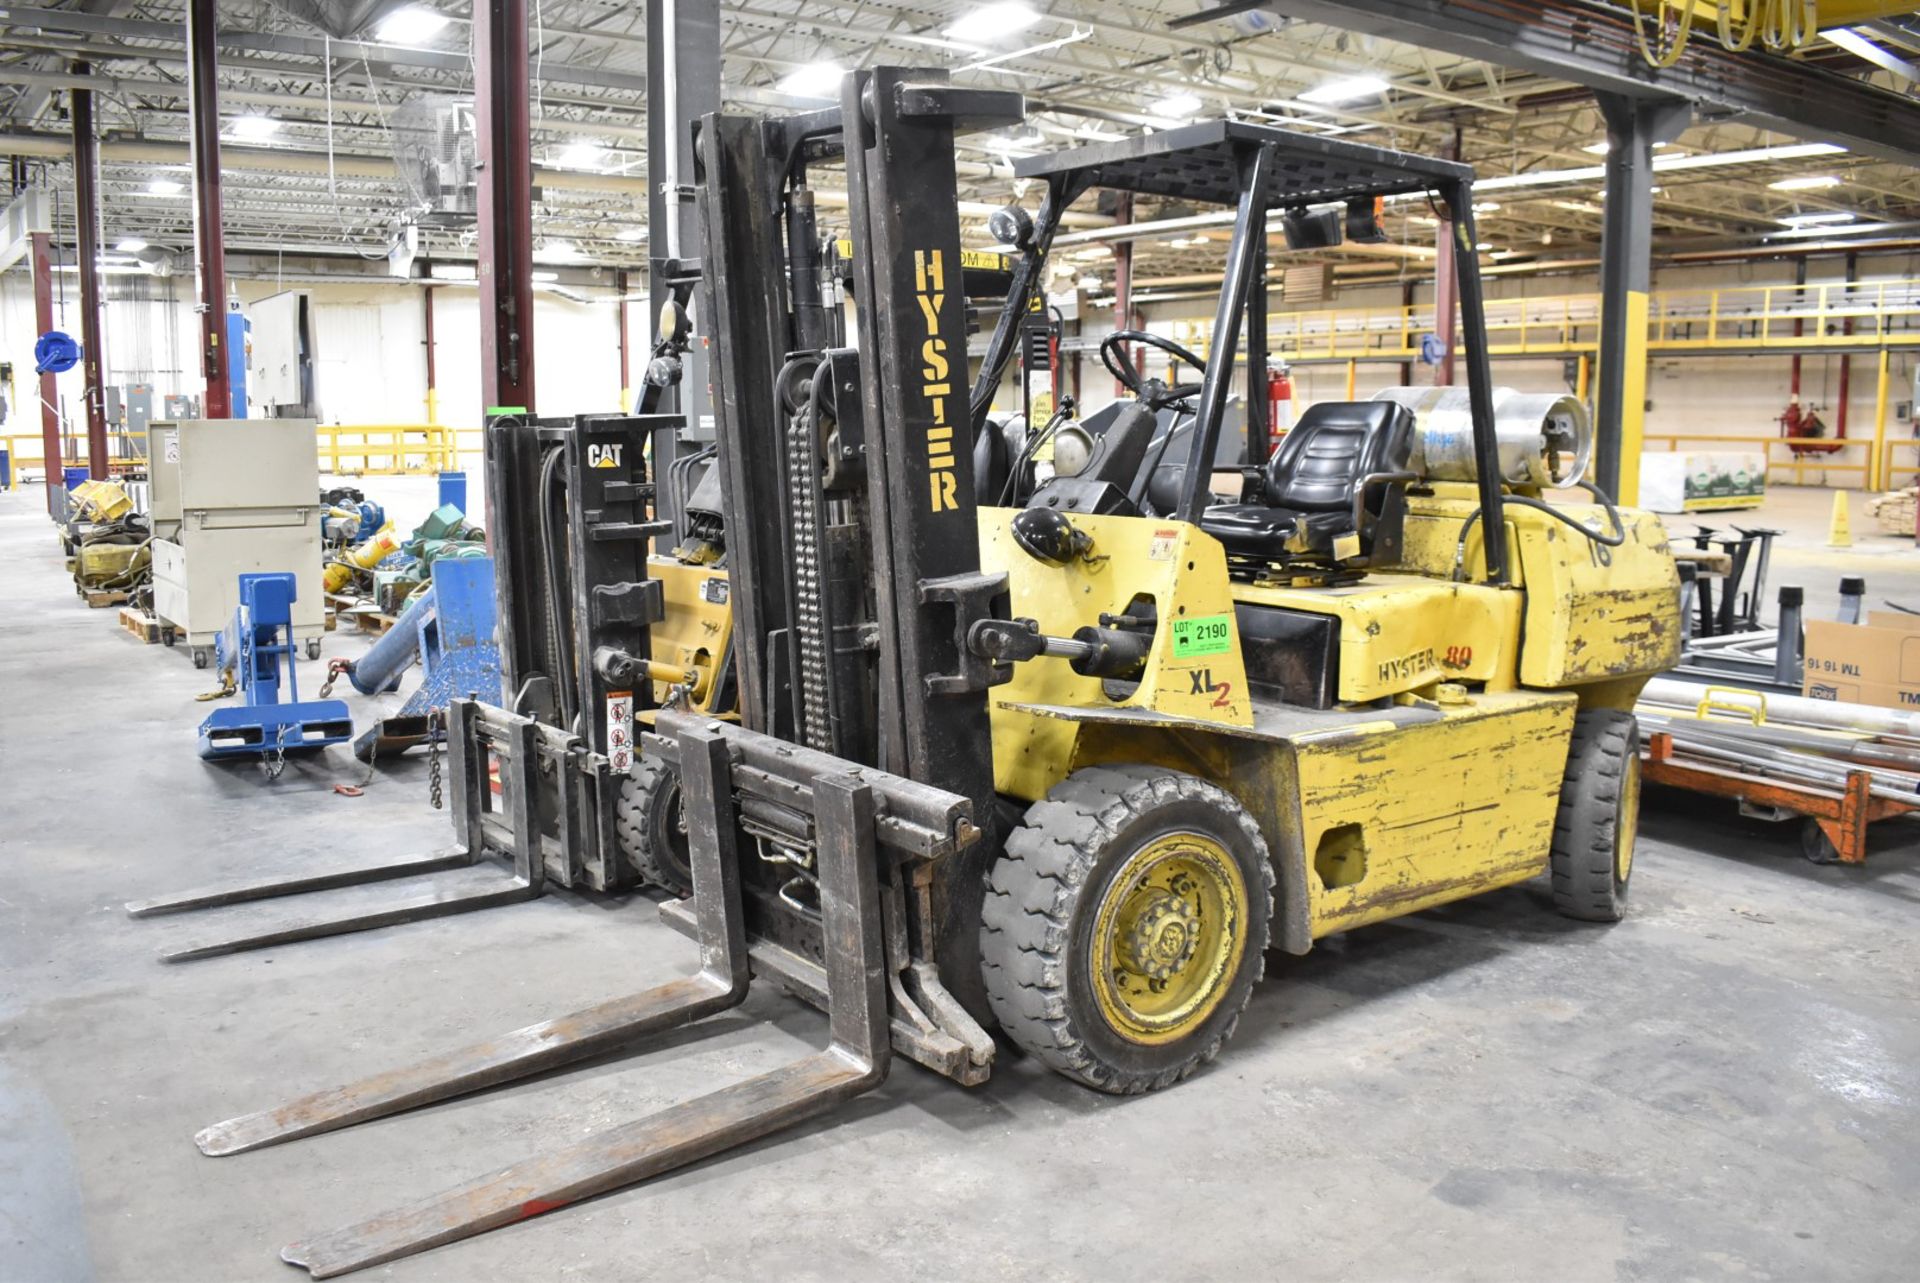 HYSTER H80XL2 7,250 LBS. CAPACITY LPG FORKLIFT WITH 121" MAX VERTICAL REACH, 2-STAGE HIGH VISIBILITY